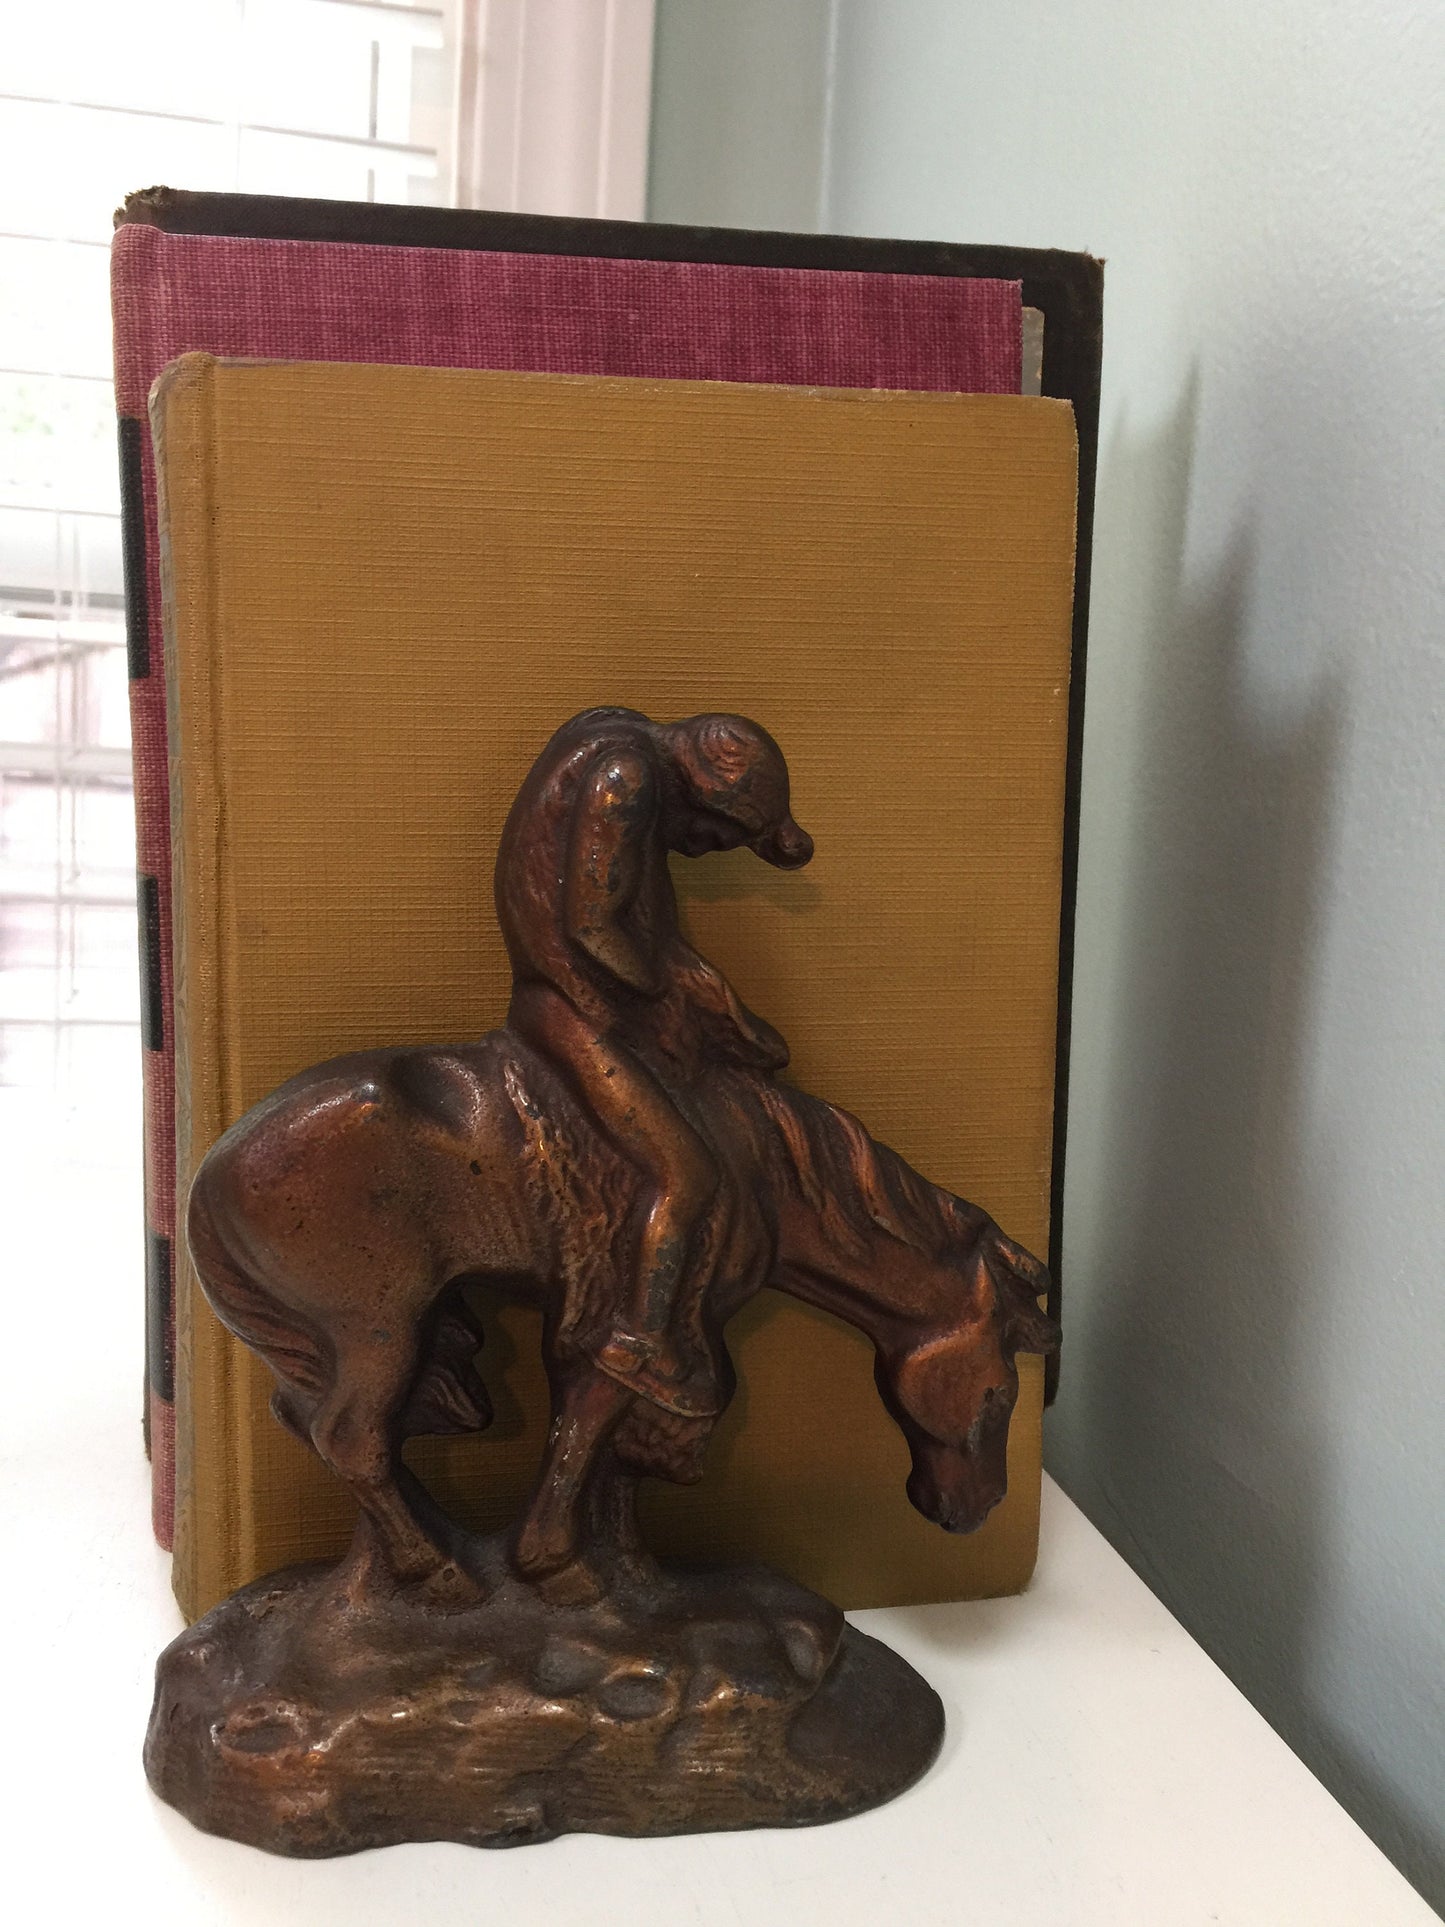 Vintage Native American bookends - End of The Trail, bookshelf display, Museum Replica, 1920s Cast Iron - Duckwells